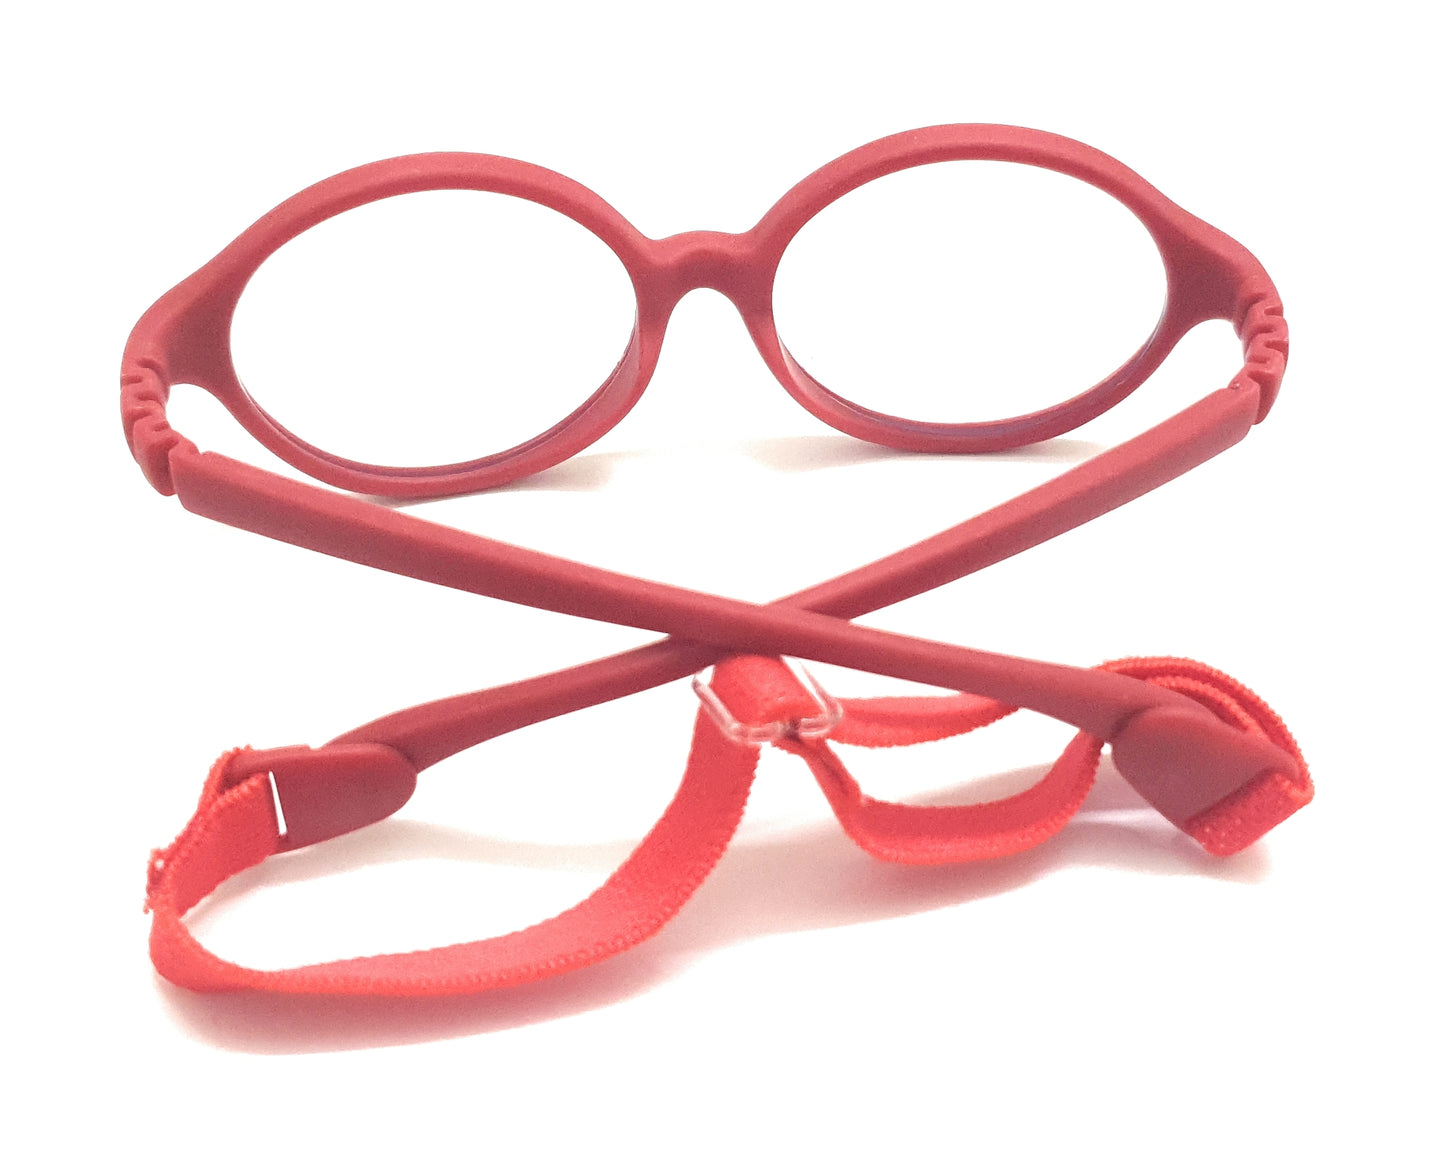 Affaires Blue Ray Block glasses Frames for Kids, Flexible, Bendable, No Screws, Glasses with anti-reflection | BC-281 (Red)